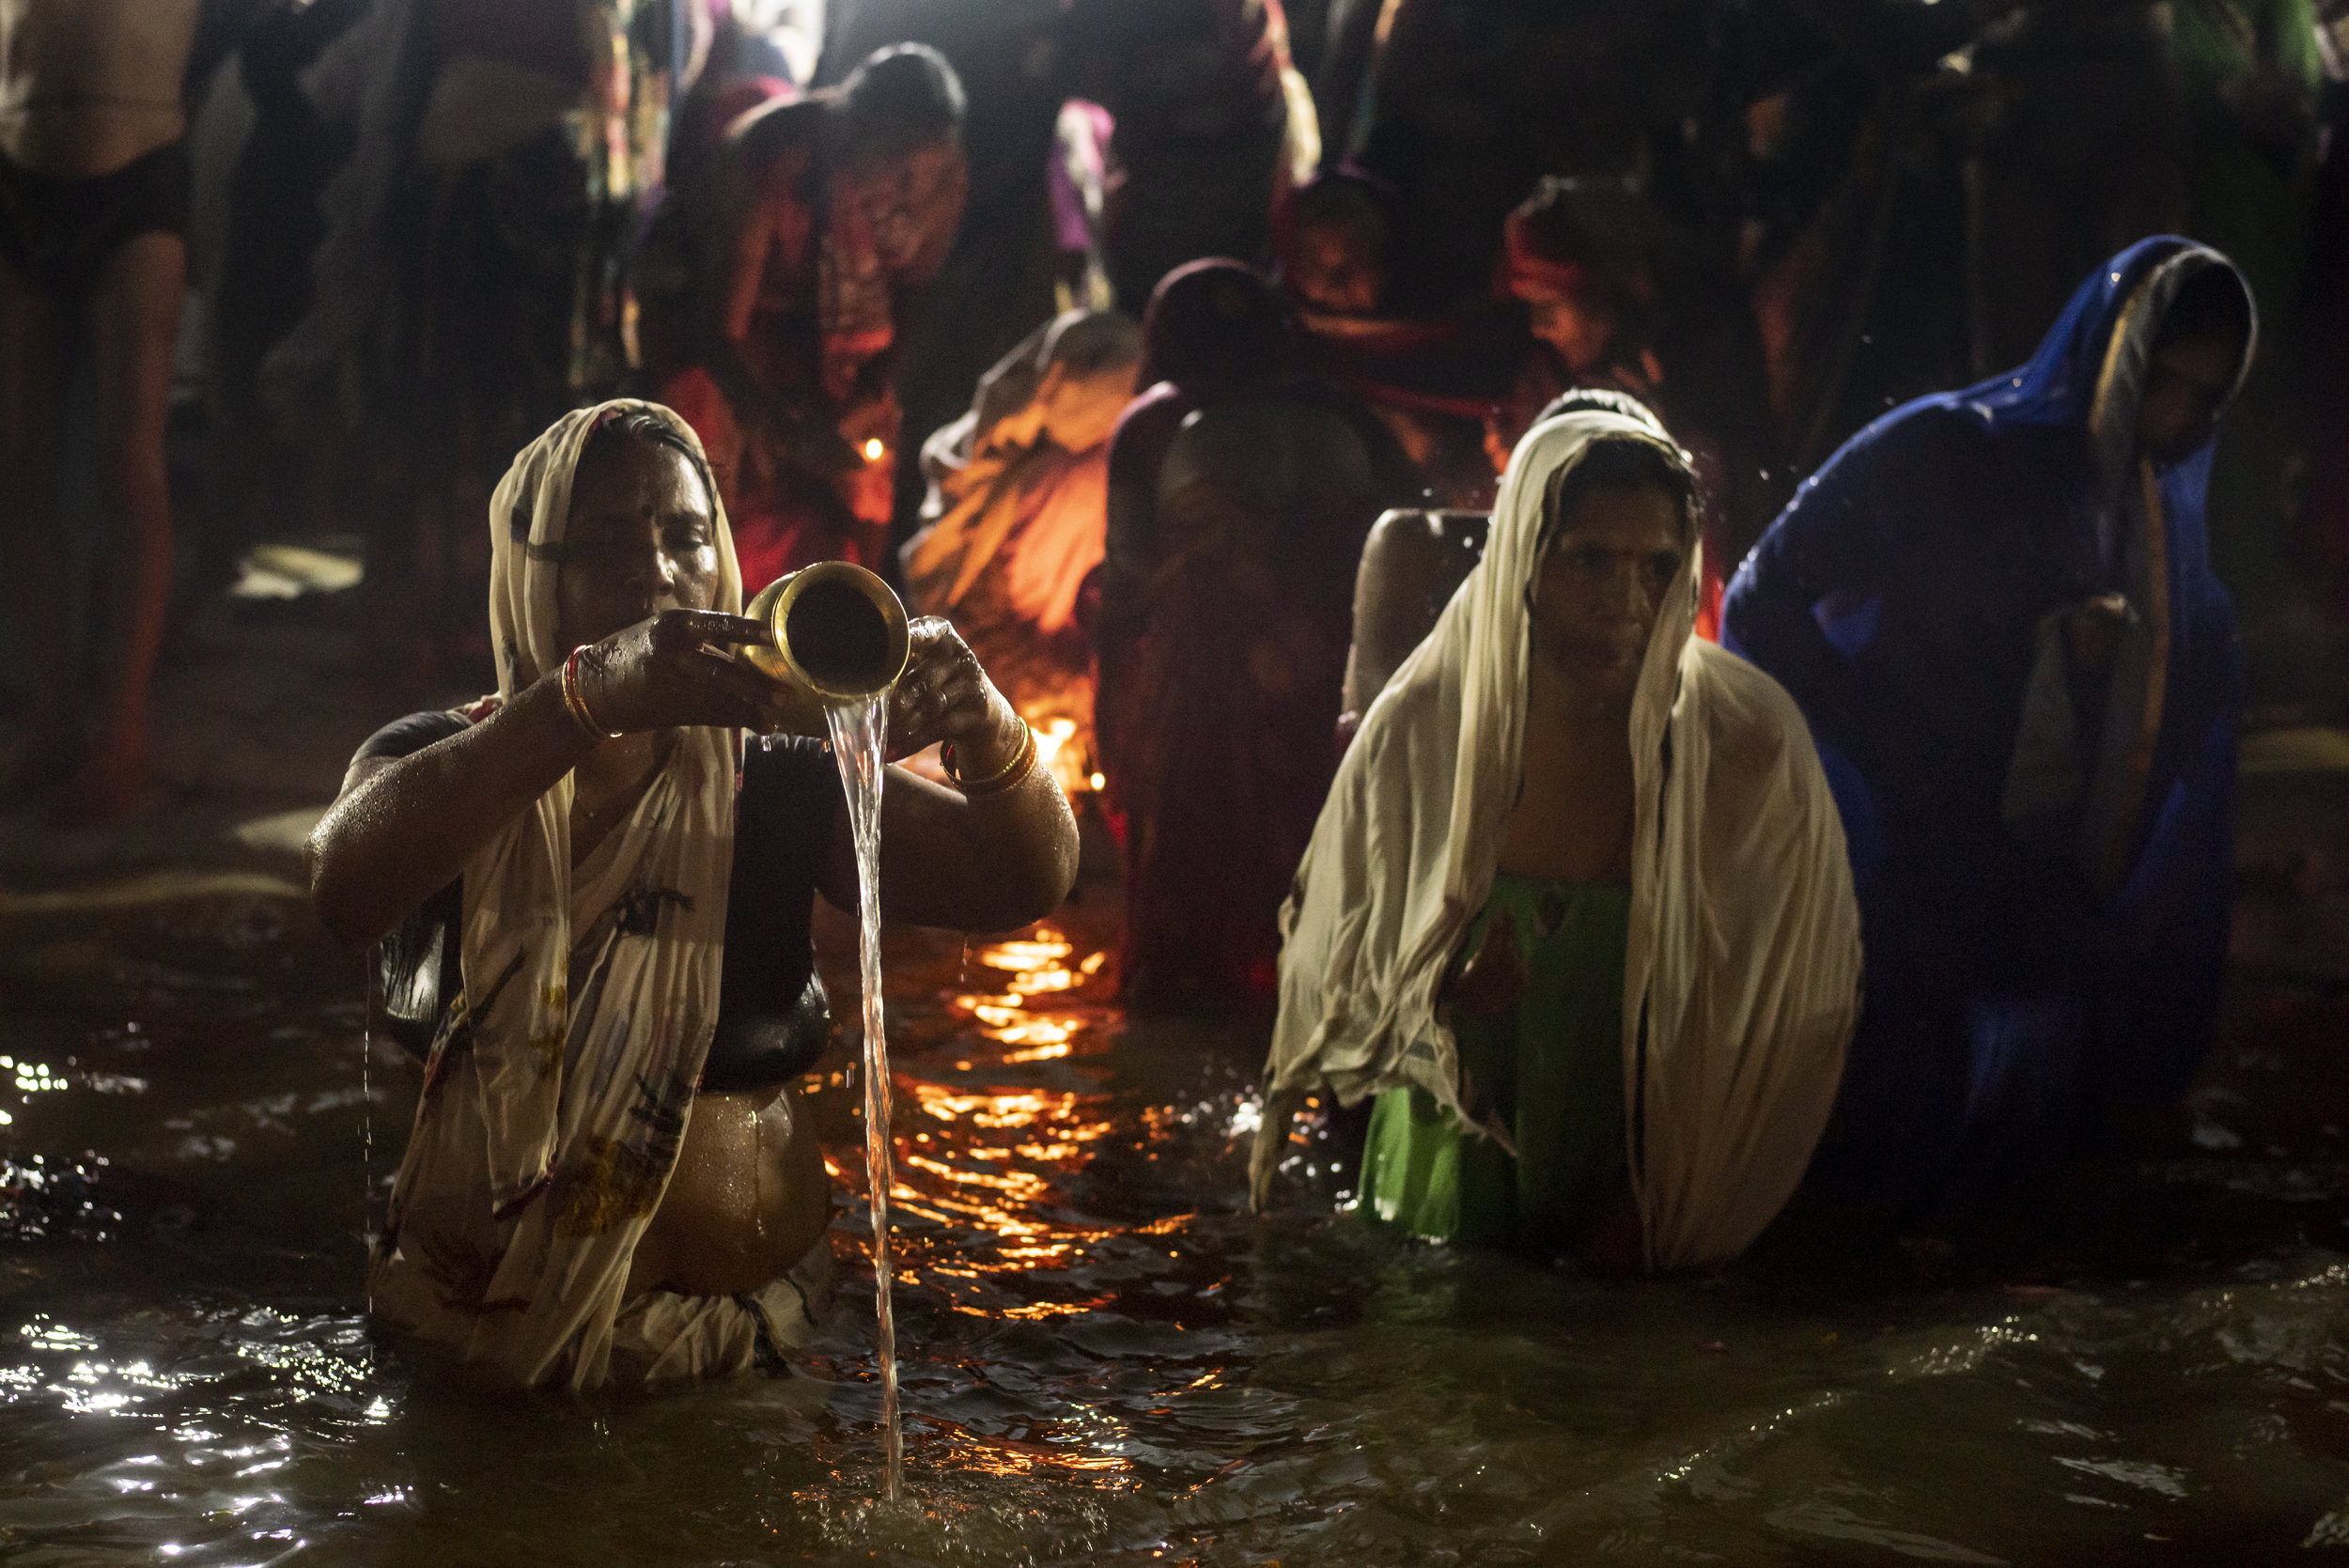  Women gather at the shores of the ganges, pouring water from lota pots, lighting puja offerings and performing ablutions 